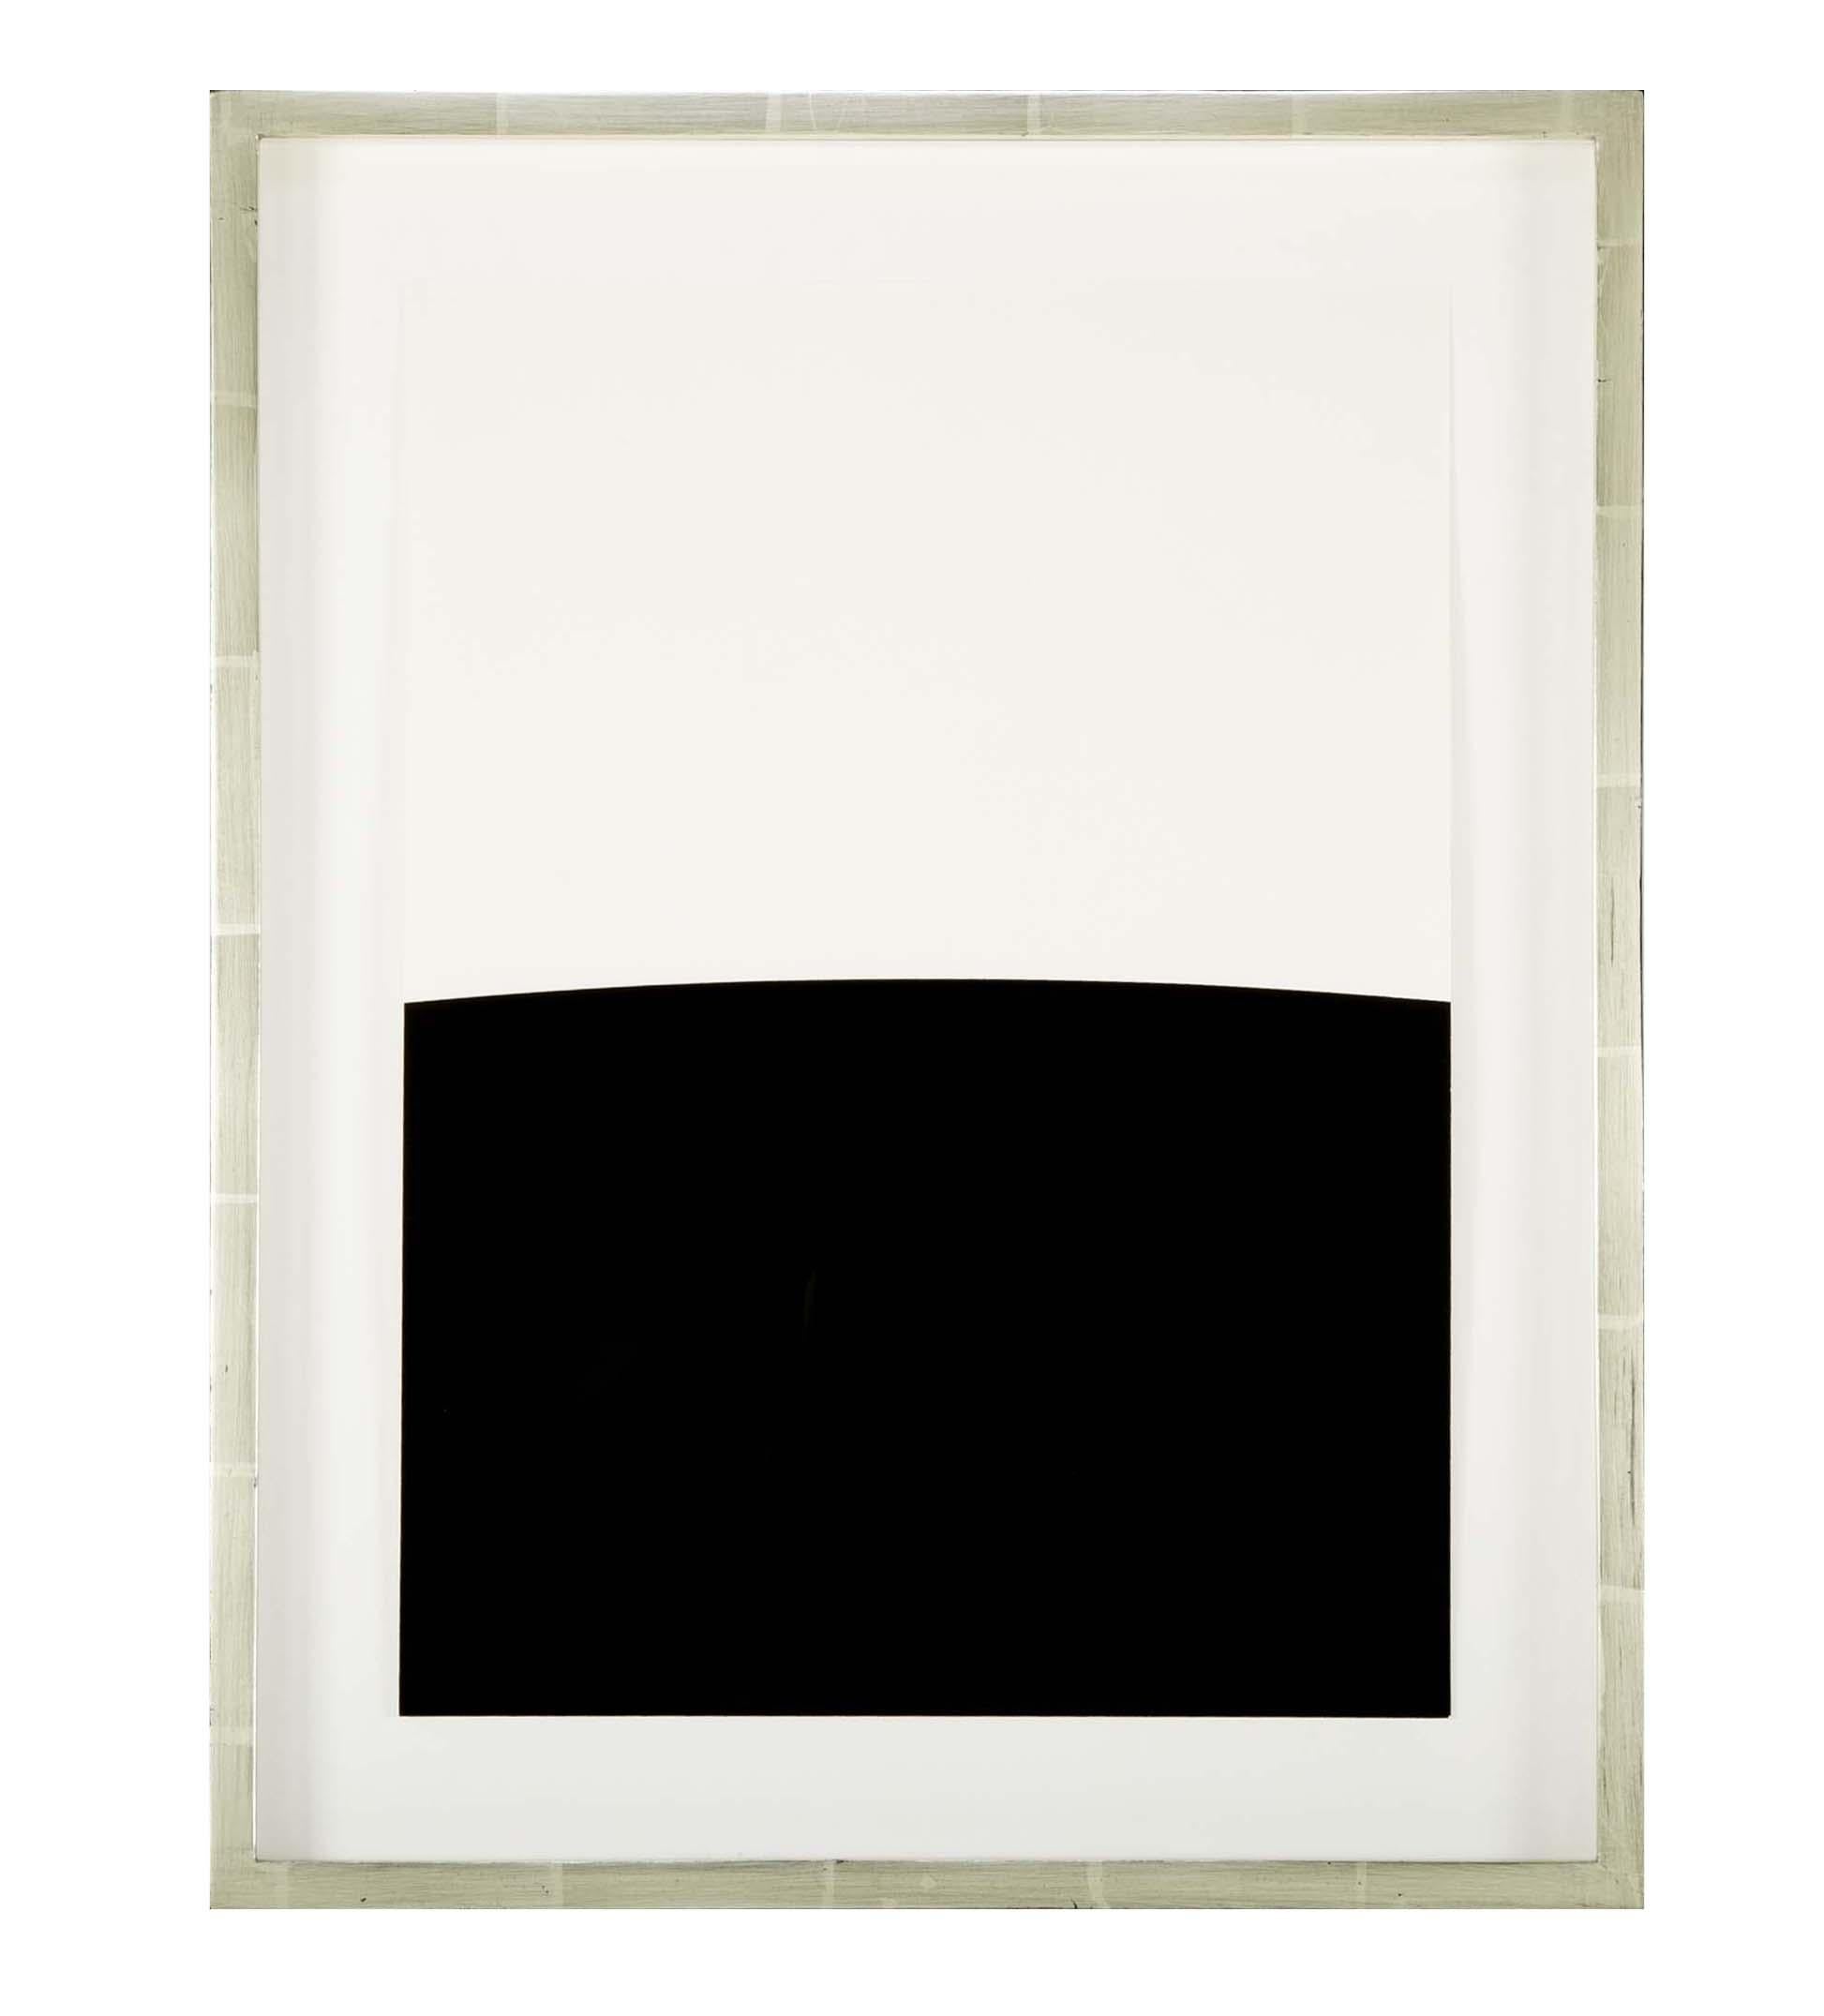 Ellsworth Kelly (American, 1923-2015) Mallarme Suite of 11 lithographs. These lithographs are pages from a book in which Kelly illustrated Stéphane Mallarme's poem 